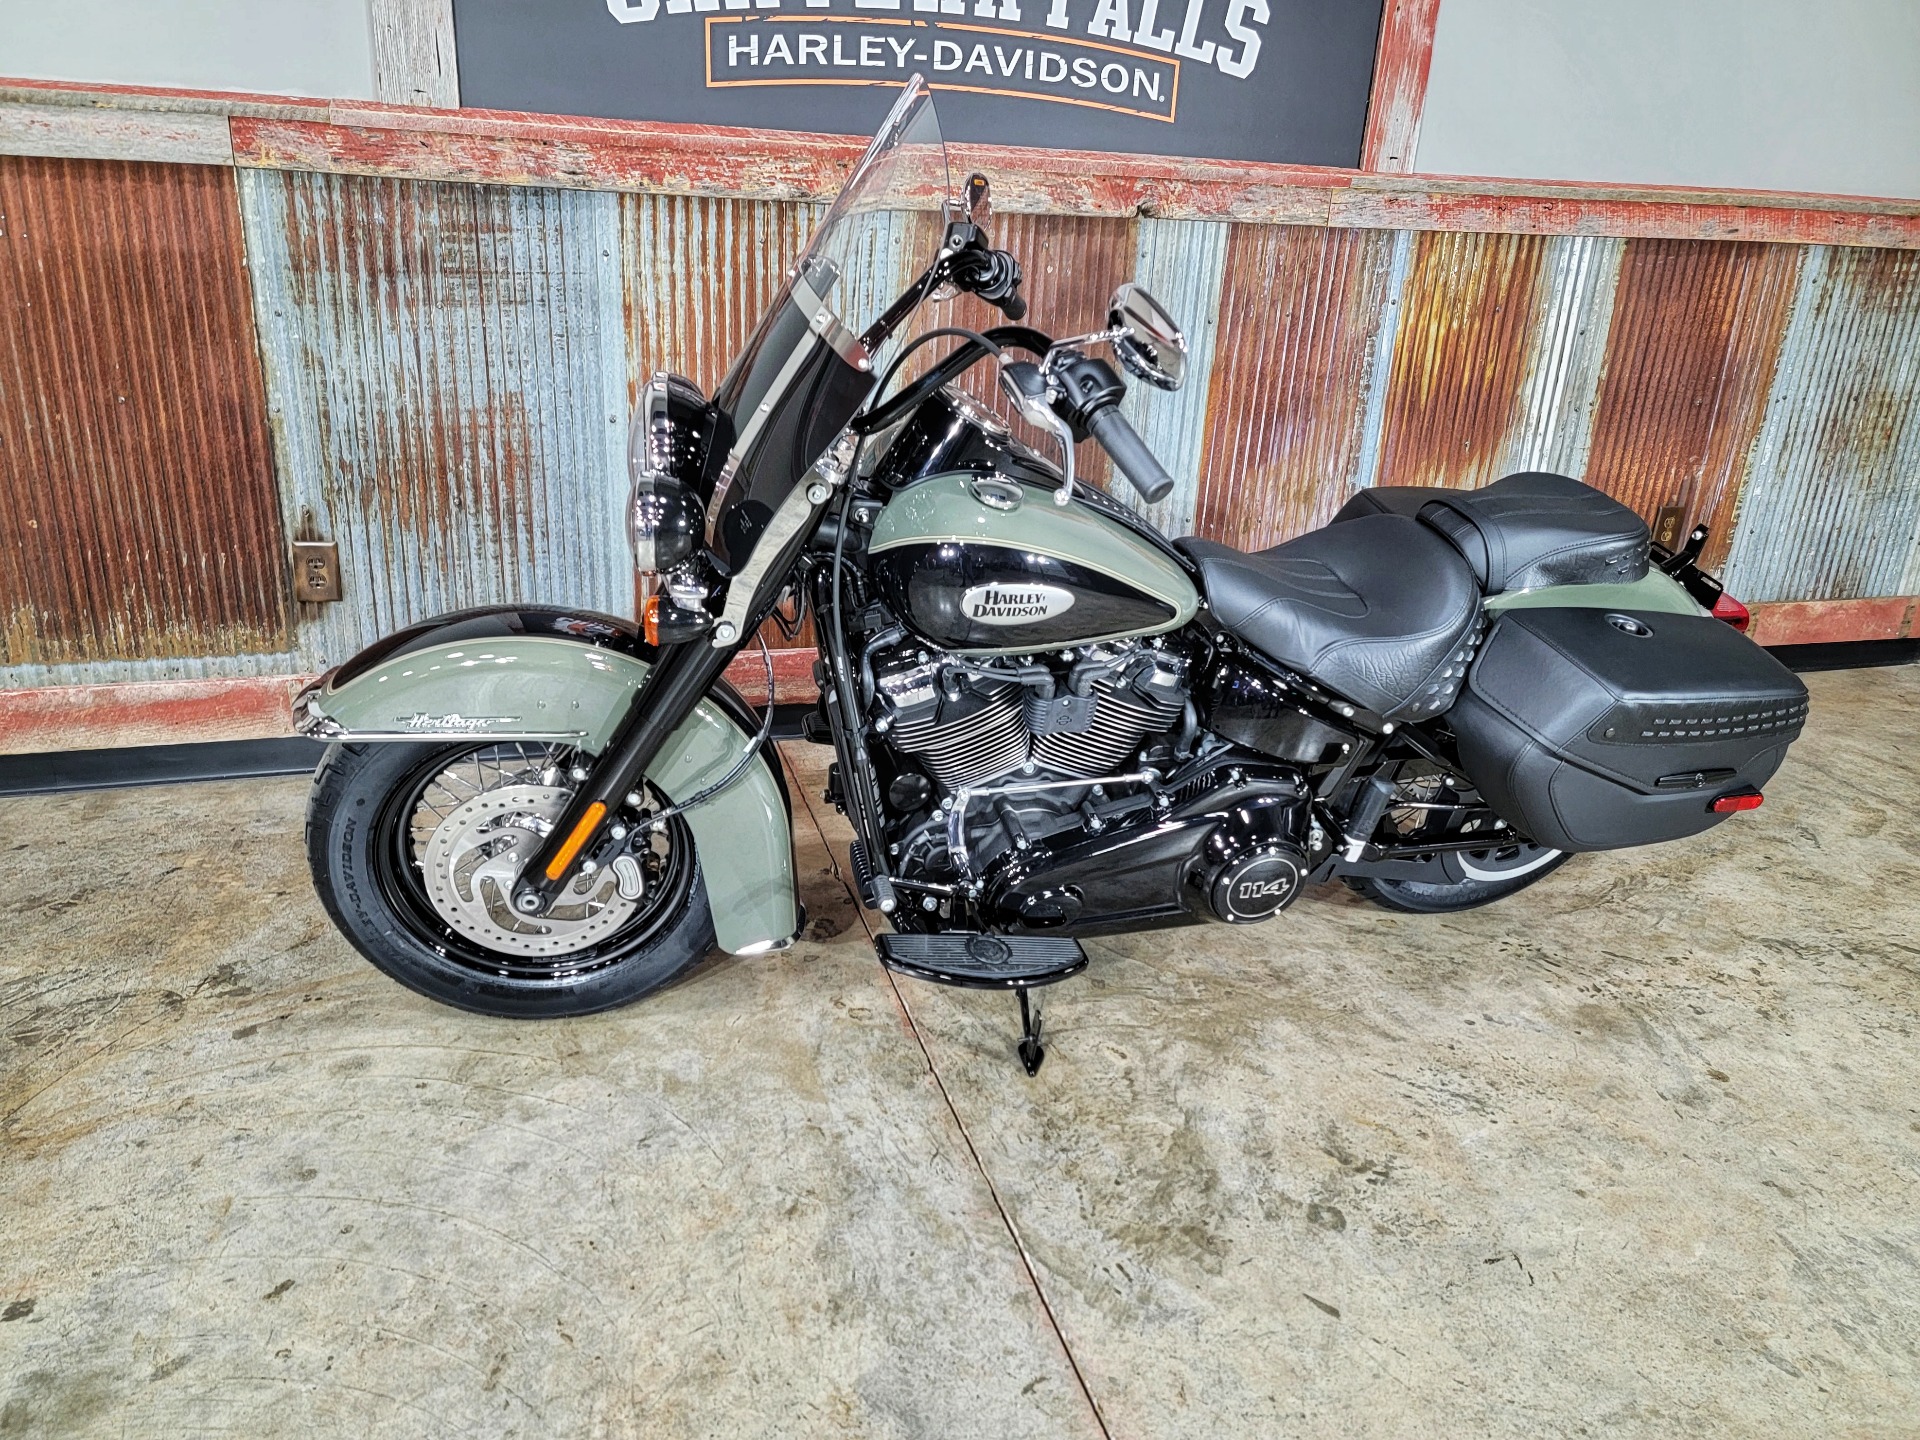 New 2021 Harley Davidson Heritage Classic 114 Deadwood Green Vivid Black Motorcycles In Chippewa Falls Wi Fx035431